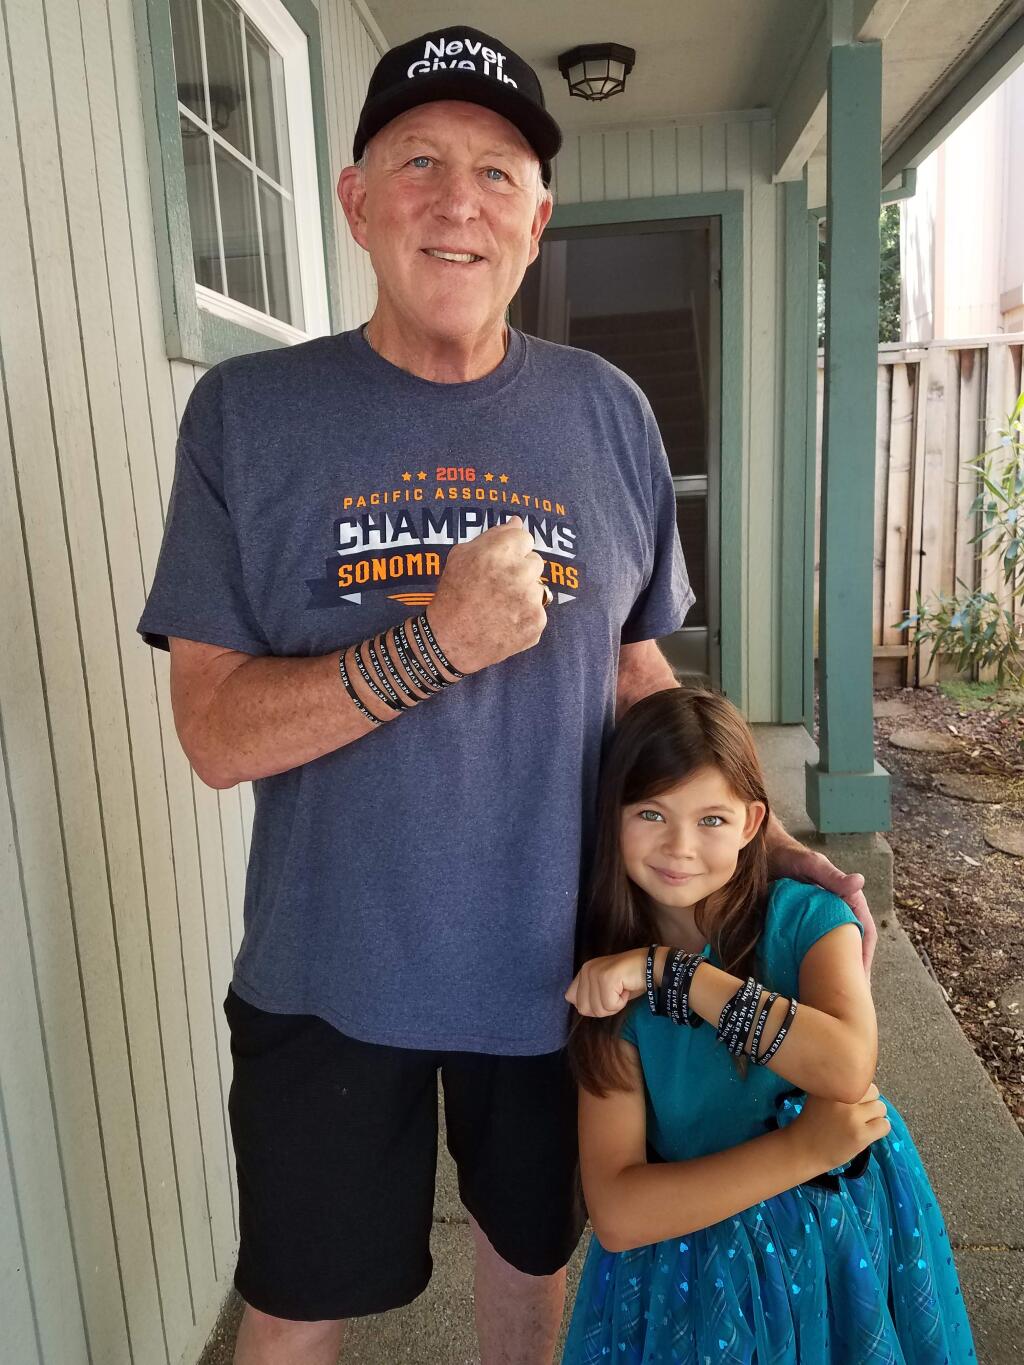 Taylor, shown here with local student Alessandra Lupo, sporting their 'Never Give Up' wristbands.